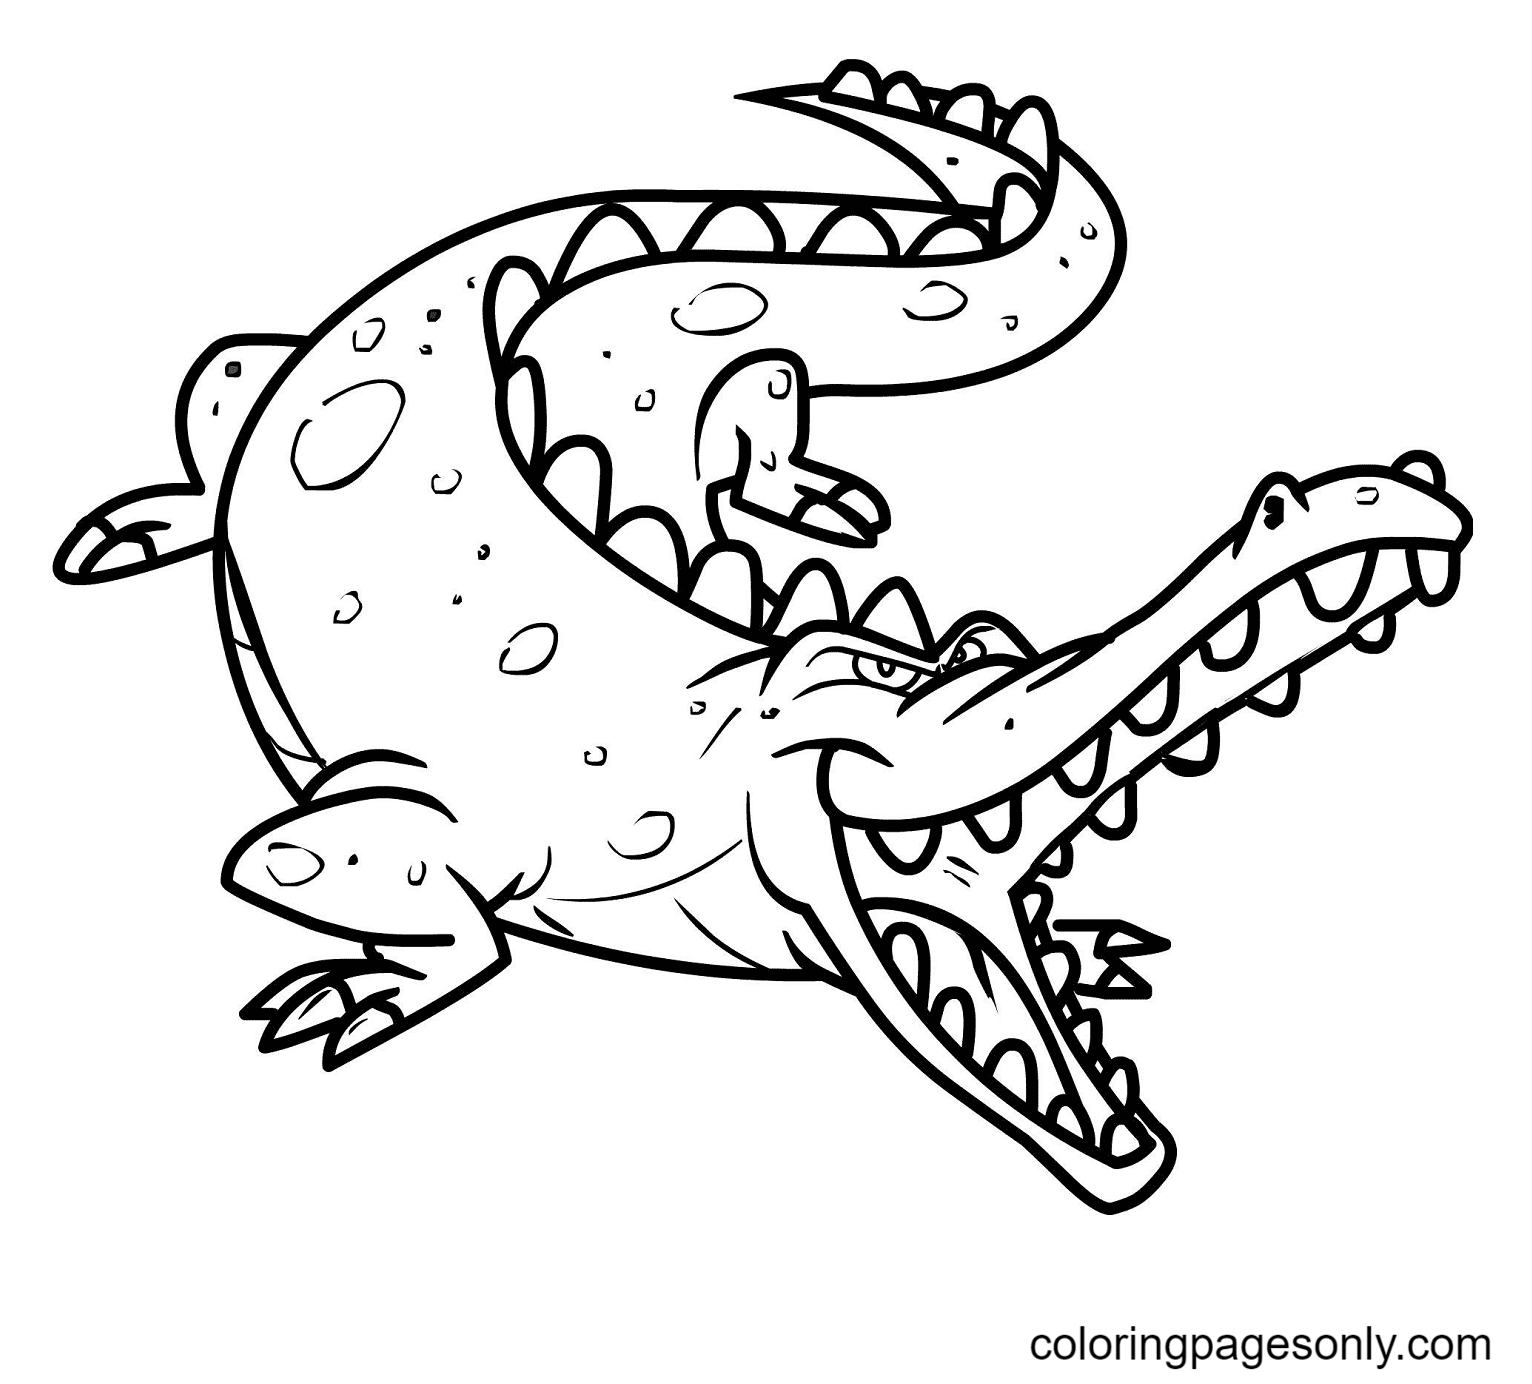 Crocodile for Kids Coloring Page